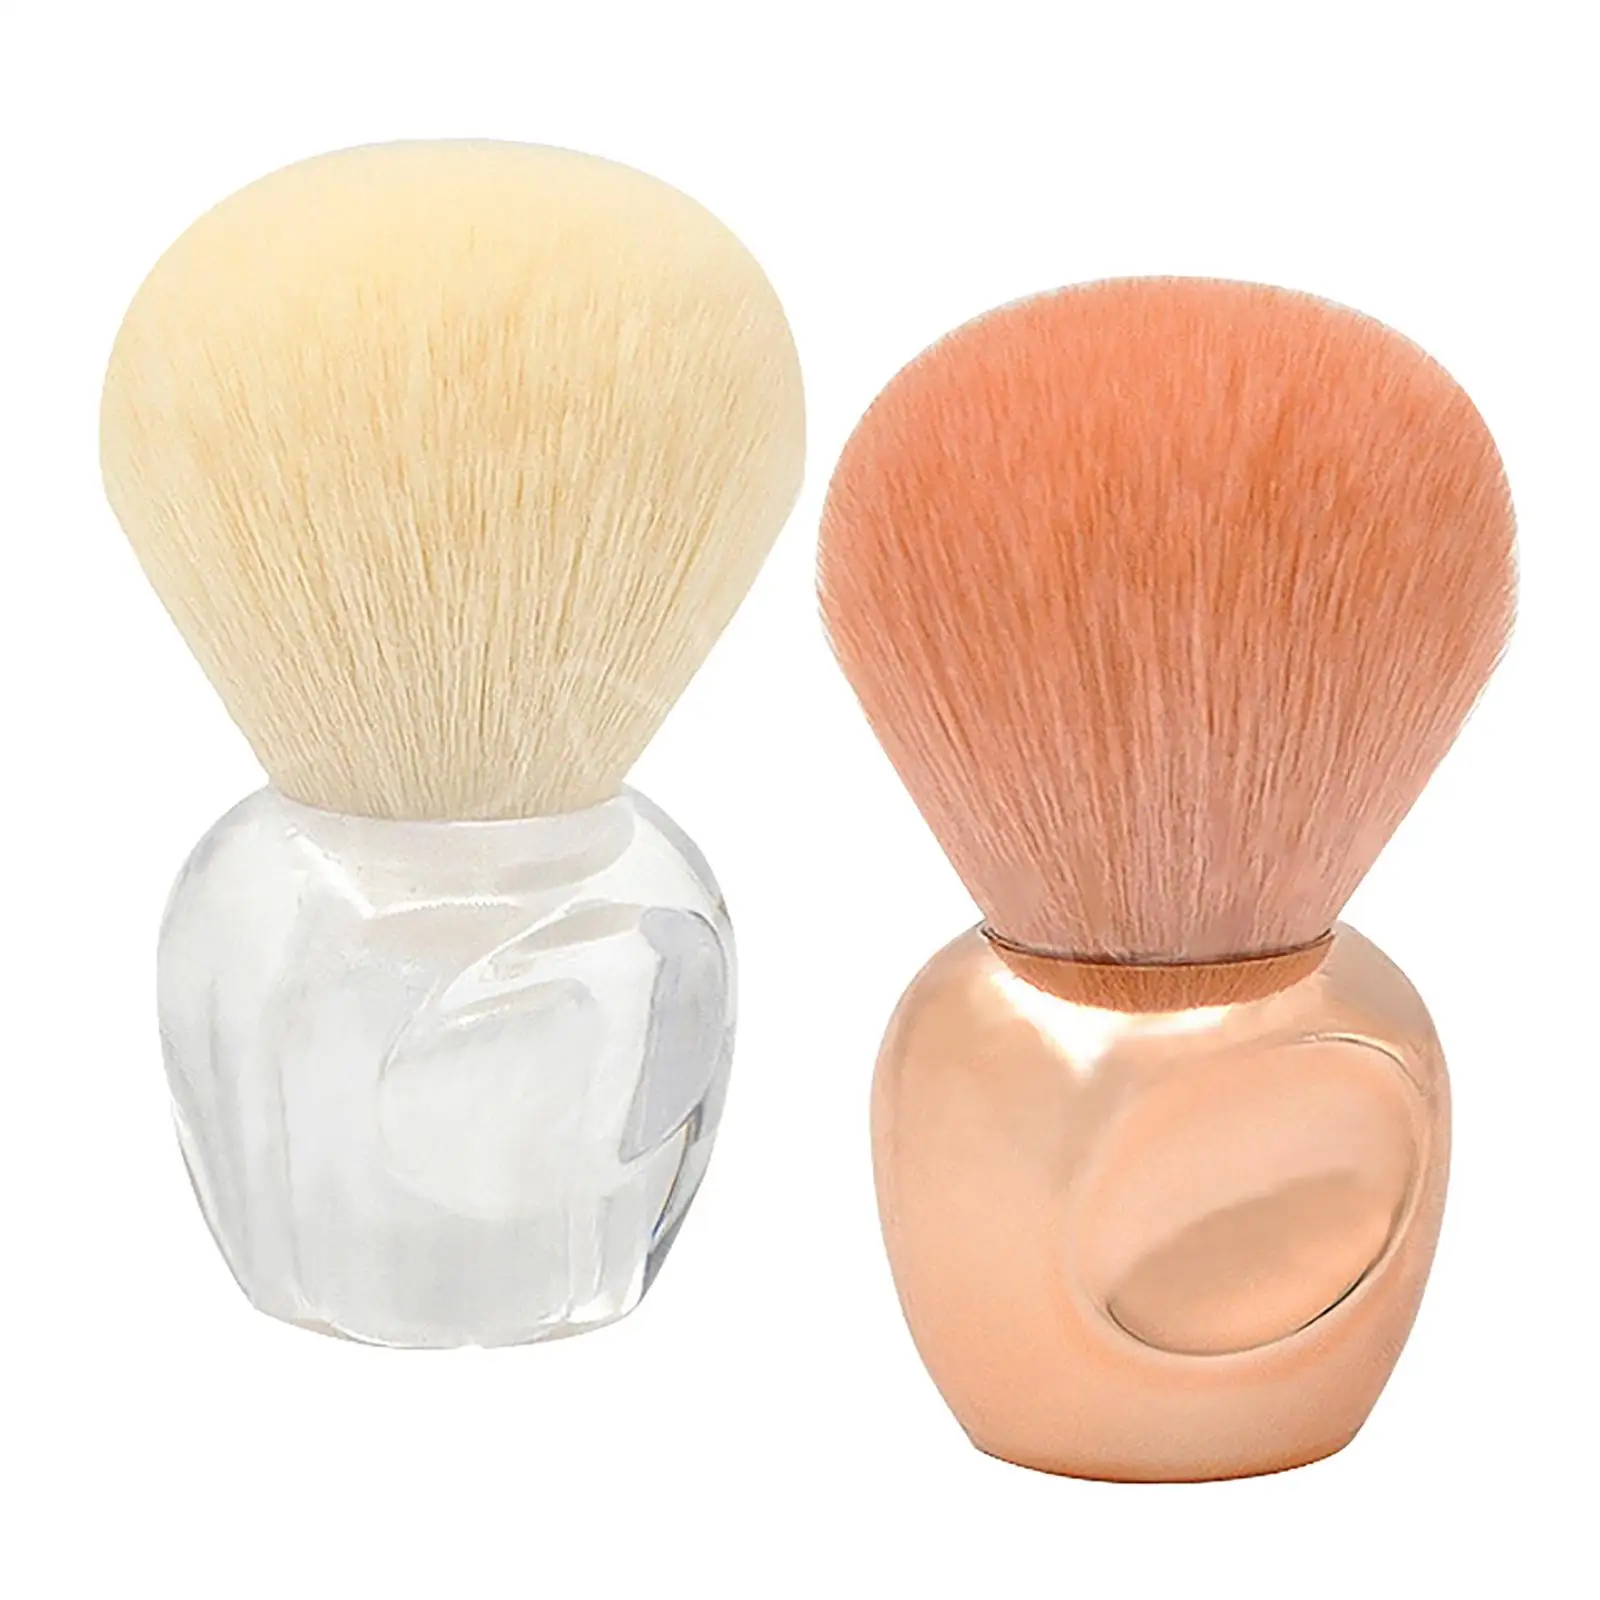 Powder Blush Make up Brush Nail Paint Gel Dust Cleaning Small Round Loose Powder Brushes for Face Makeup Nail Art Manicure Tools